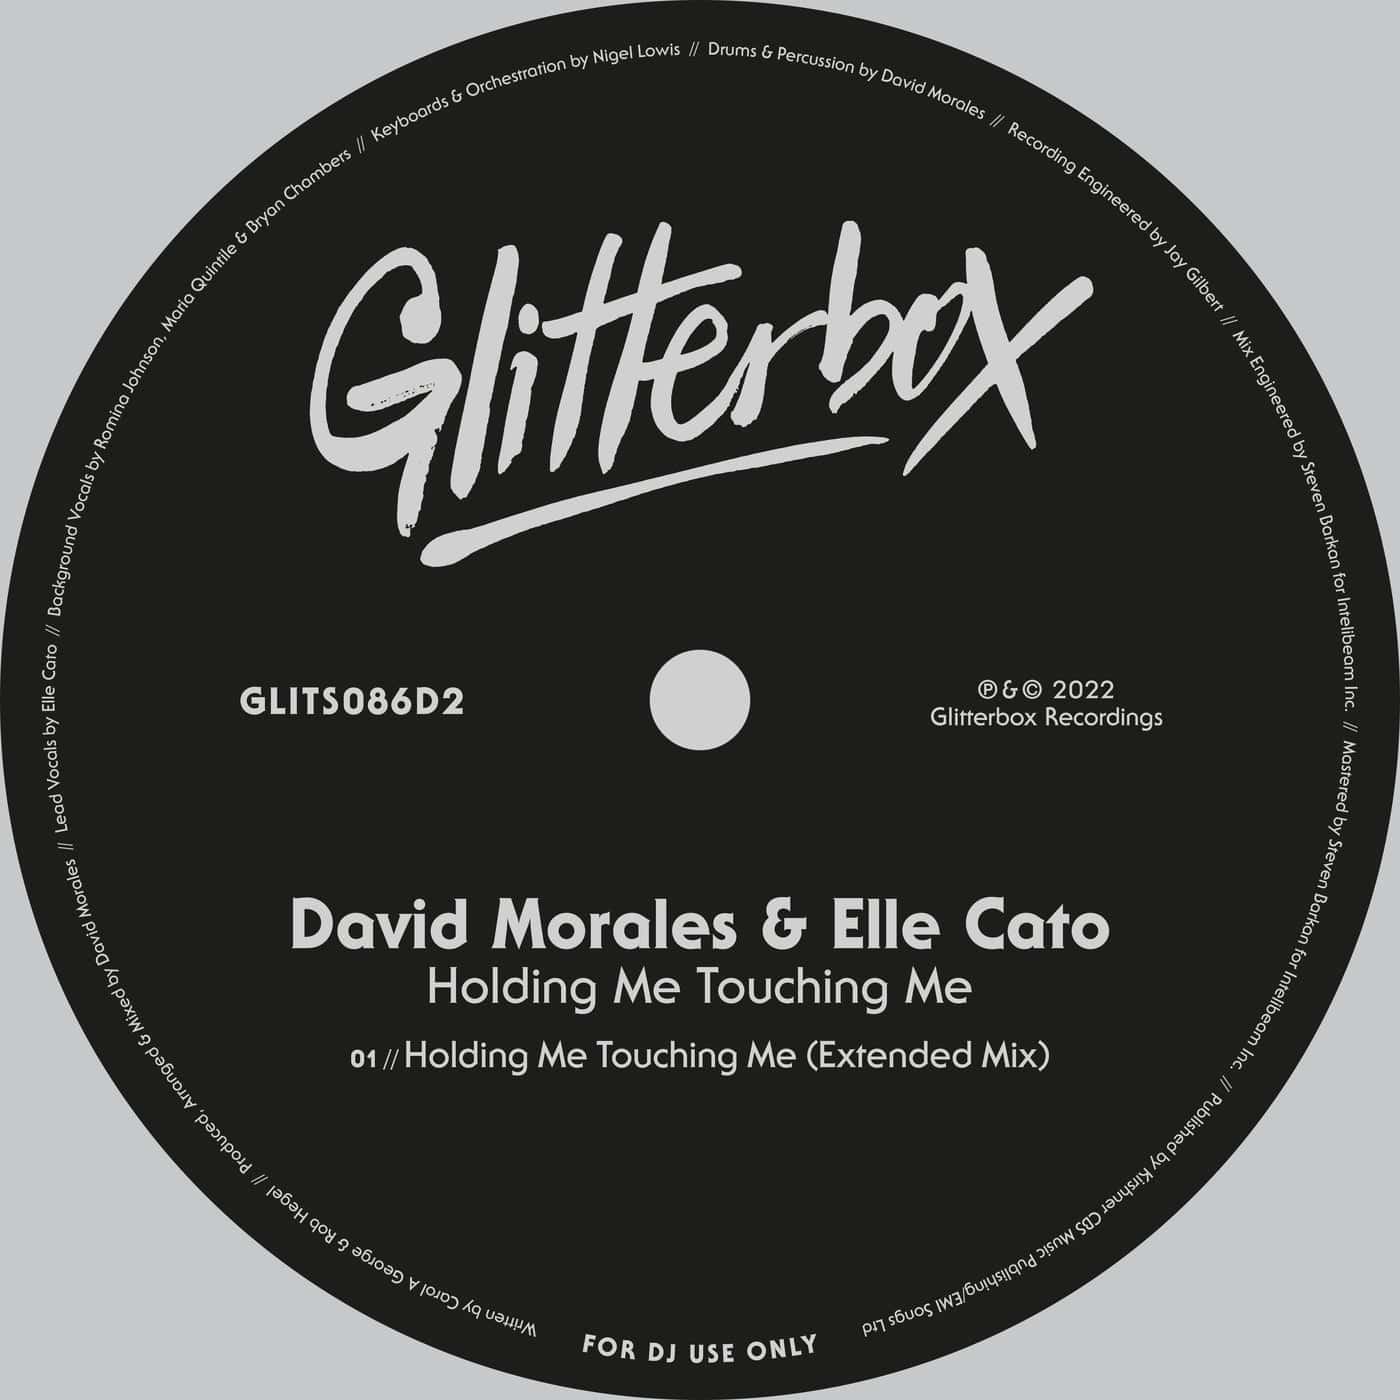 image cover: David Morales, Elle Cato - Holding Me Touching Me - Extended Mix / GLITS086D2